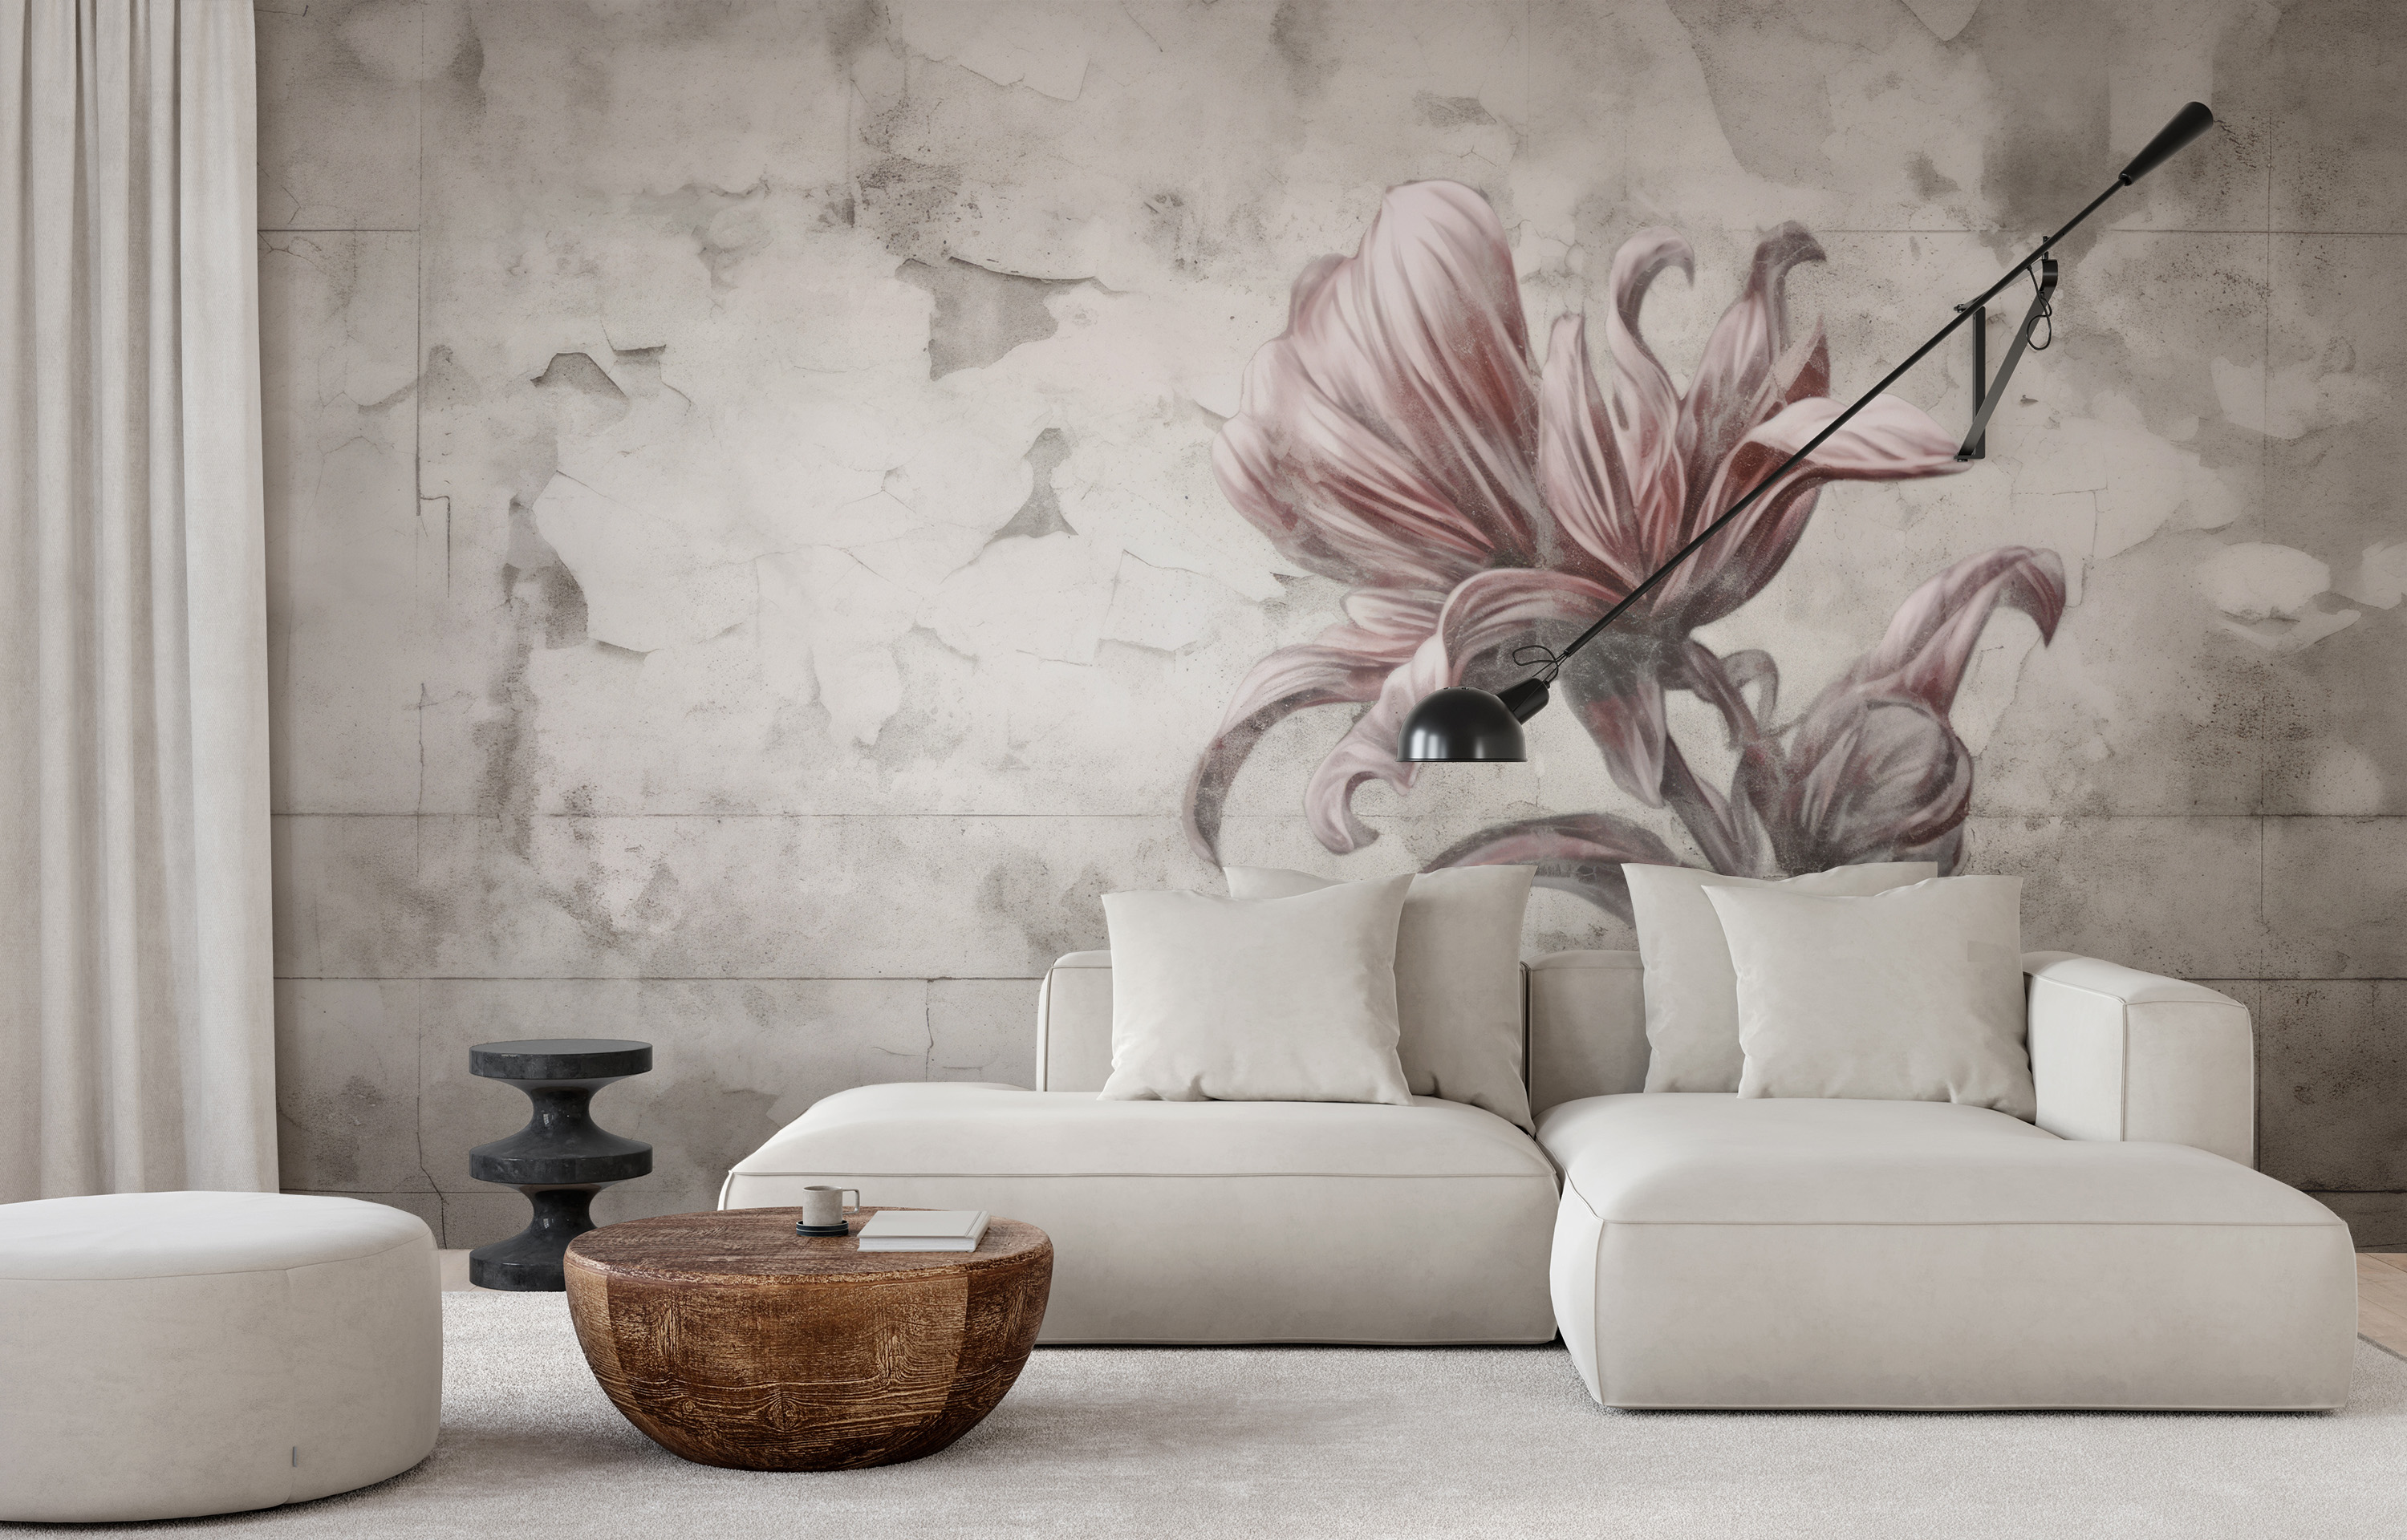 One of the Decomura photo wallpaper patterns from the "Concrete&Flowers" collection